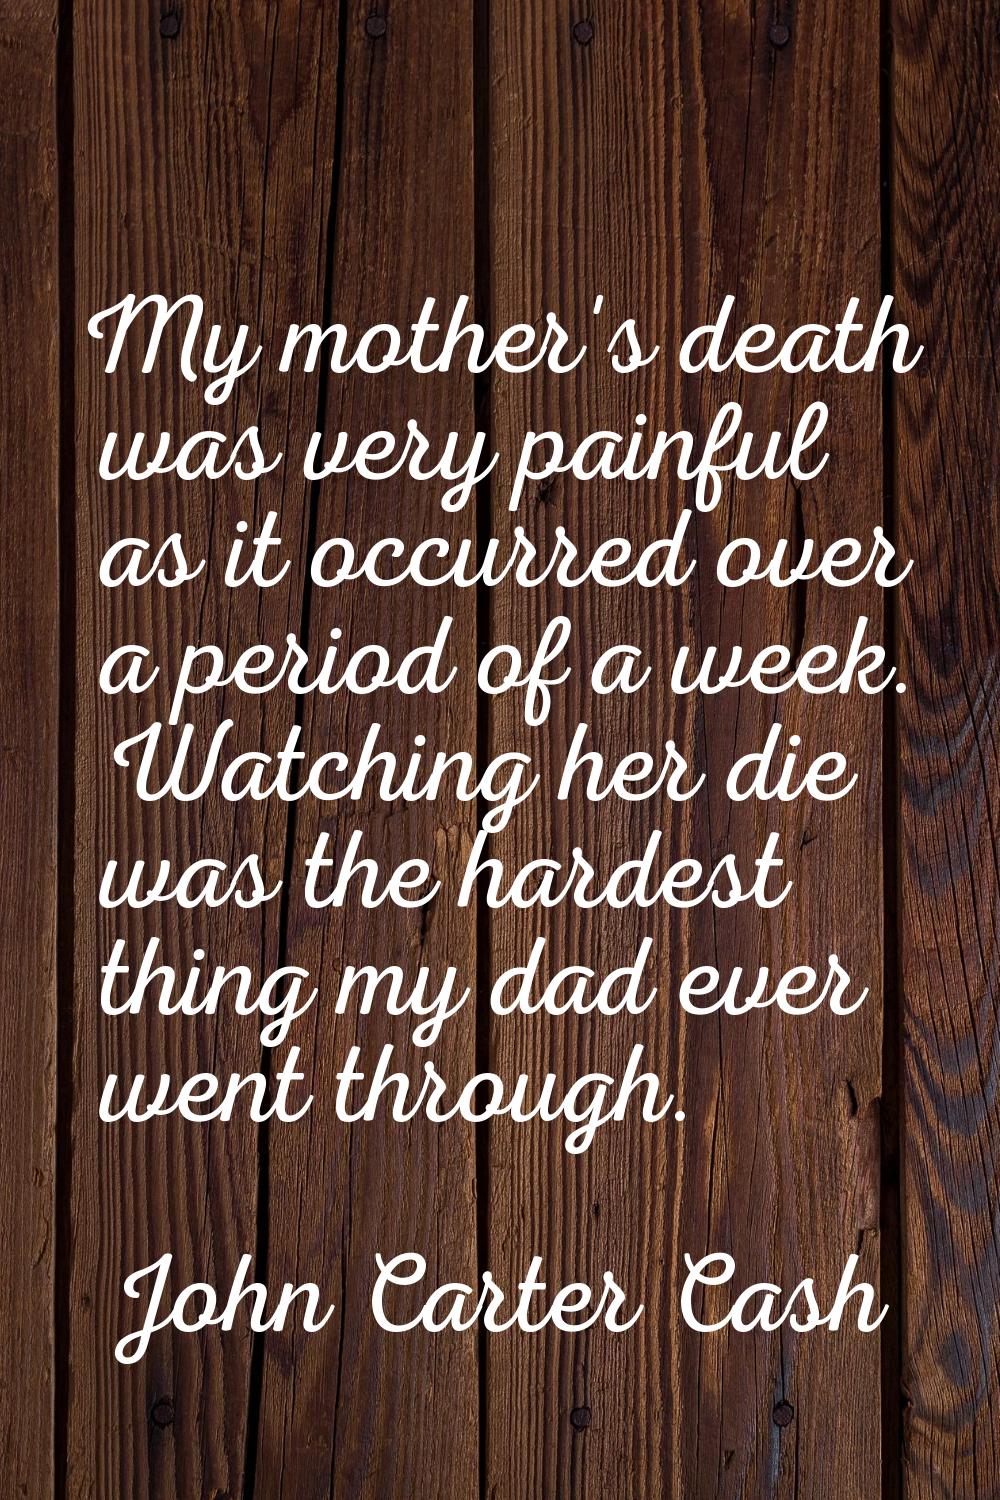 My mother's death was very painful as it occurred over a period of a week. Watching her die was the